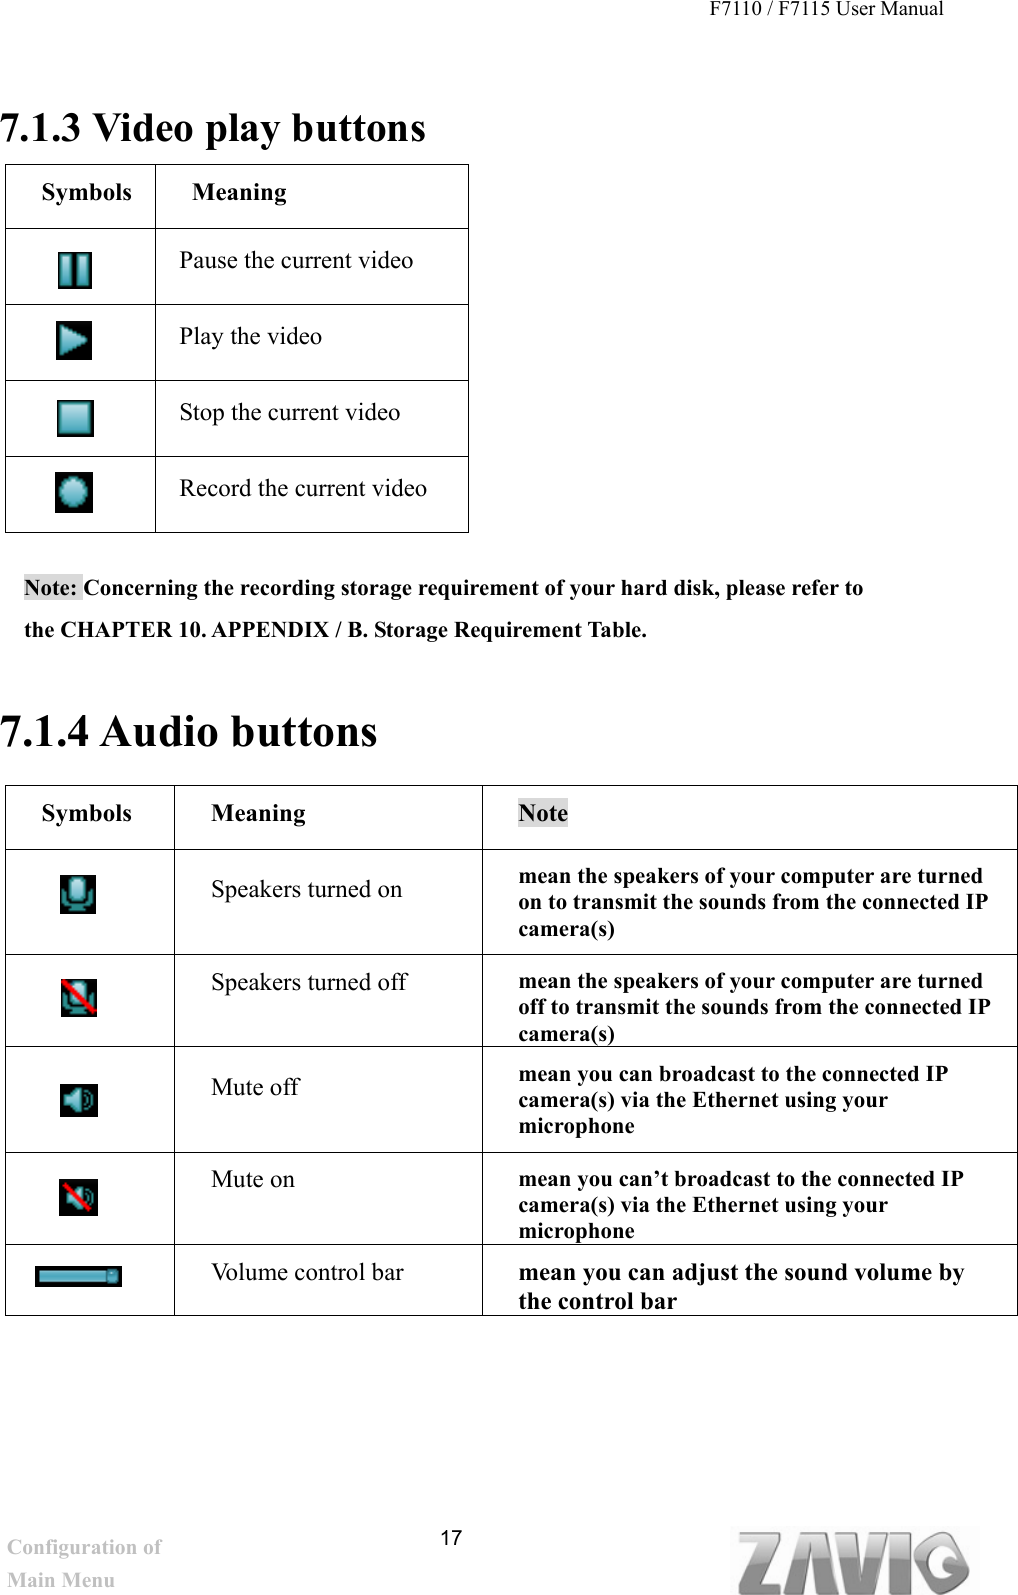 F7110 / F7115 User Manual    7.1.3 Video play buttons Symbols Meaning  Pause the current video  Play the video  Stop the current video  Record the current video Note: Concerning the recording storage requirement of your hard disk, please refer to                 the CHAPTER 10. APPENDIX / B. Storage Requirement Table.  7.1.4 Audio buttons   Symbols Meaning  Note  Speakers turned on  mean the speakers of your computer are turned on to transmit the sounds from the connected IP camera(s)   Speakers turned off  mean the speakers of your computer are turned off to transmit the sounds from the connected IP camera(s)  Mute off     mean you can broadcast to the connected IP camera(s) via the Ethernet using your microphone    Mute on  mean you can’t broadcast to the connected IP camera(s) via the Ethernet using your microphone   Volume control bar  mean you can adjust the sound volume by the control bar     17 Configuration of Main Menu 